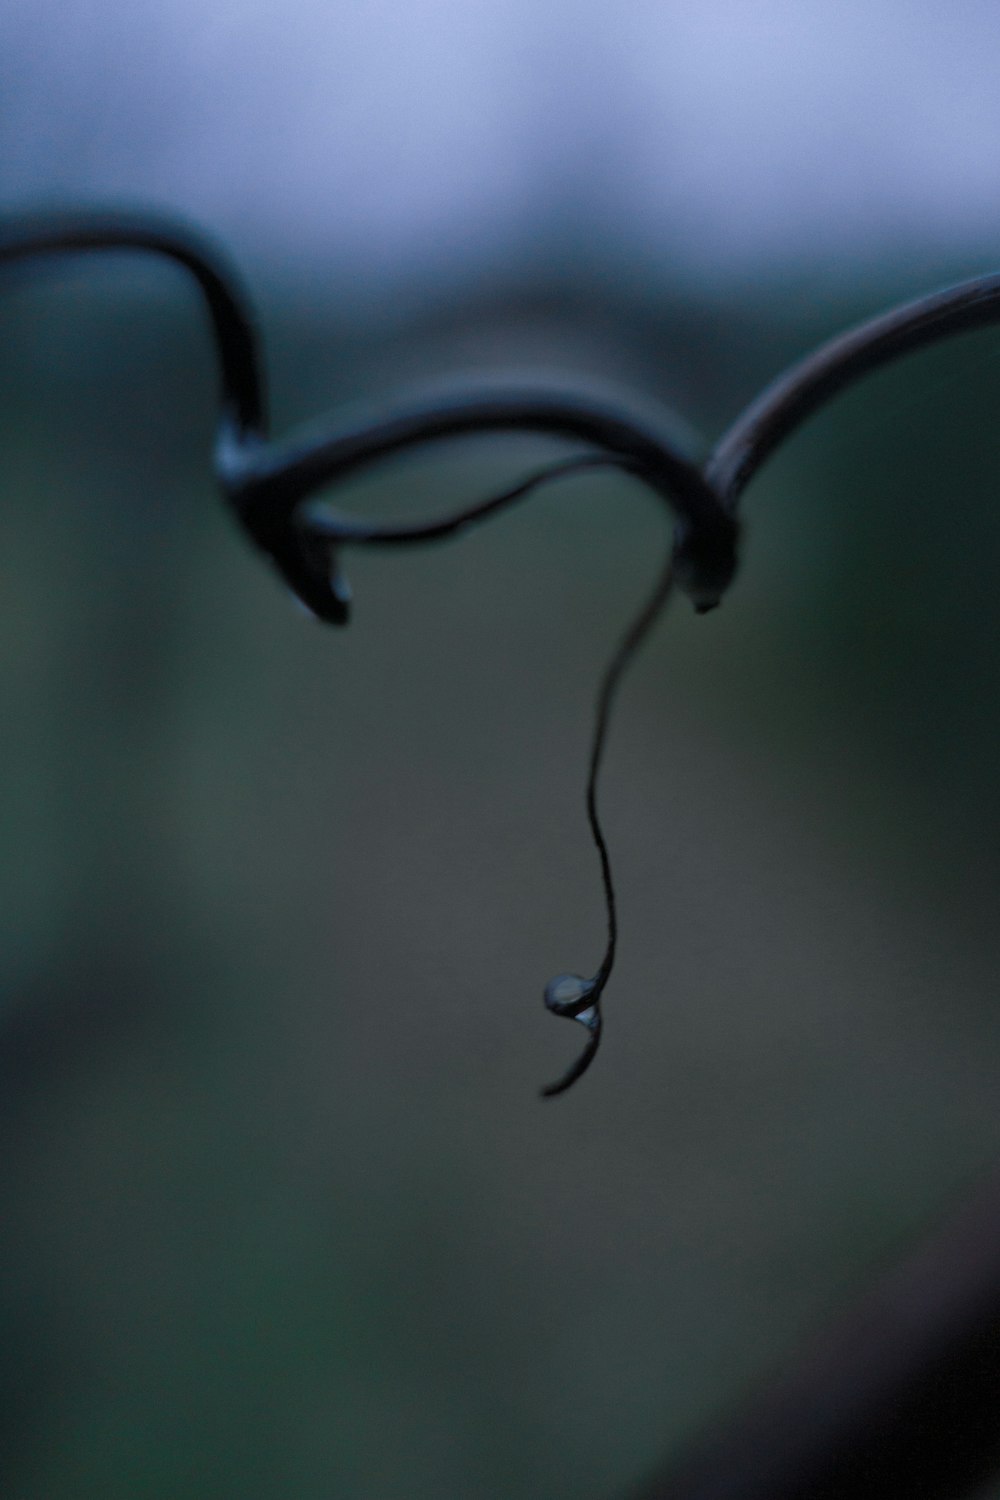 a drop of water hanging from a wire